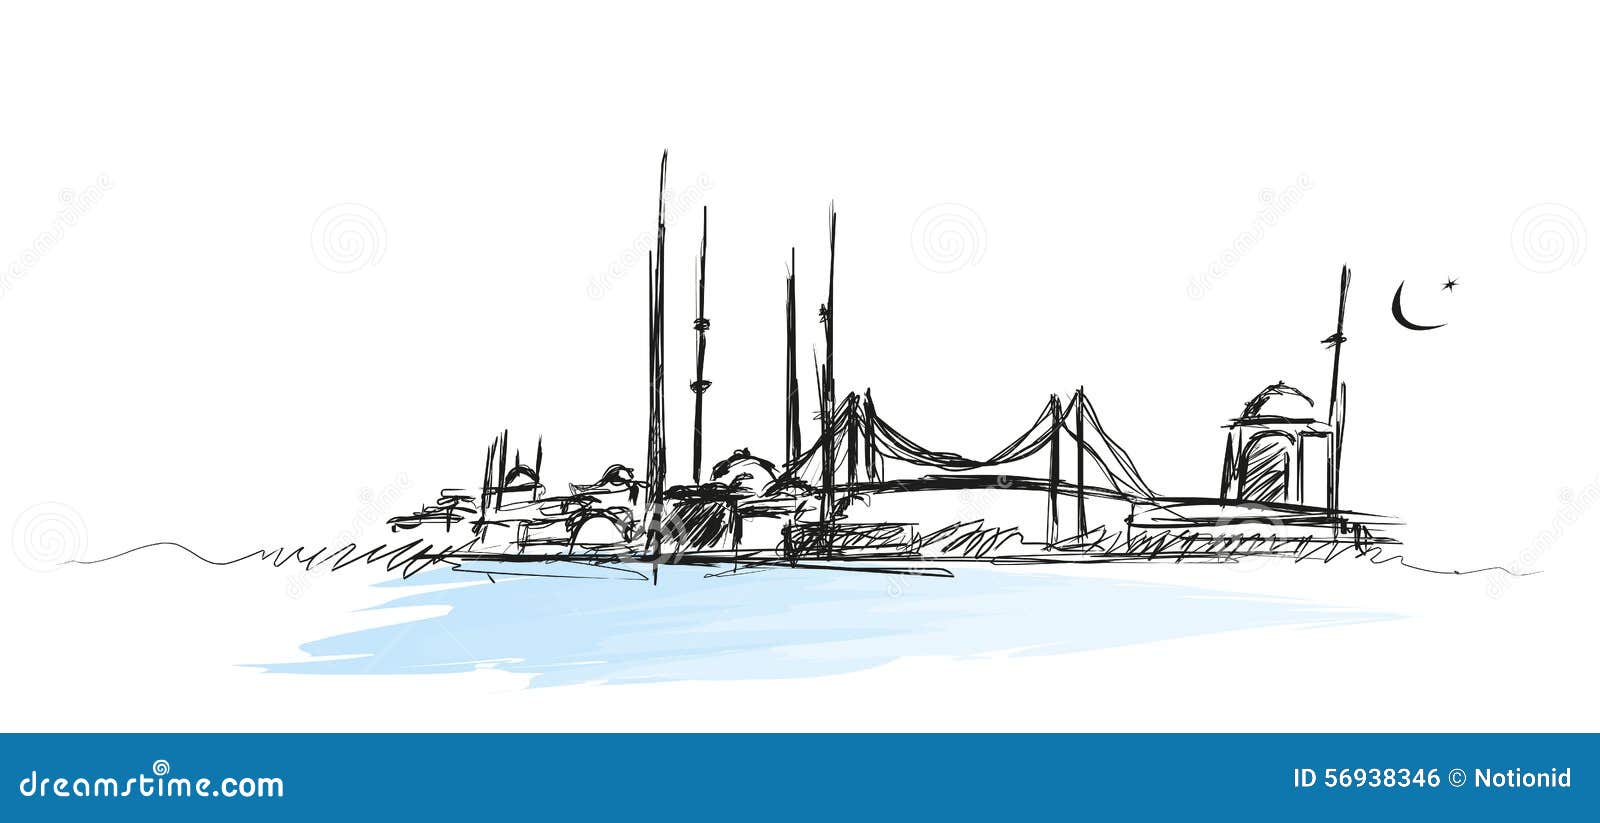 istanbul clipart - photo #7